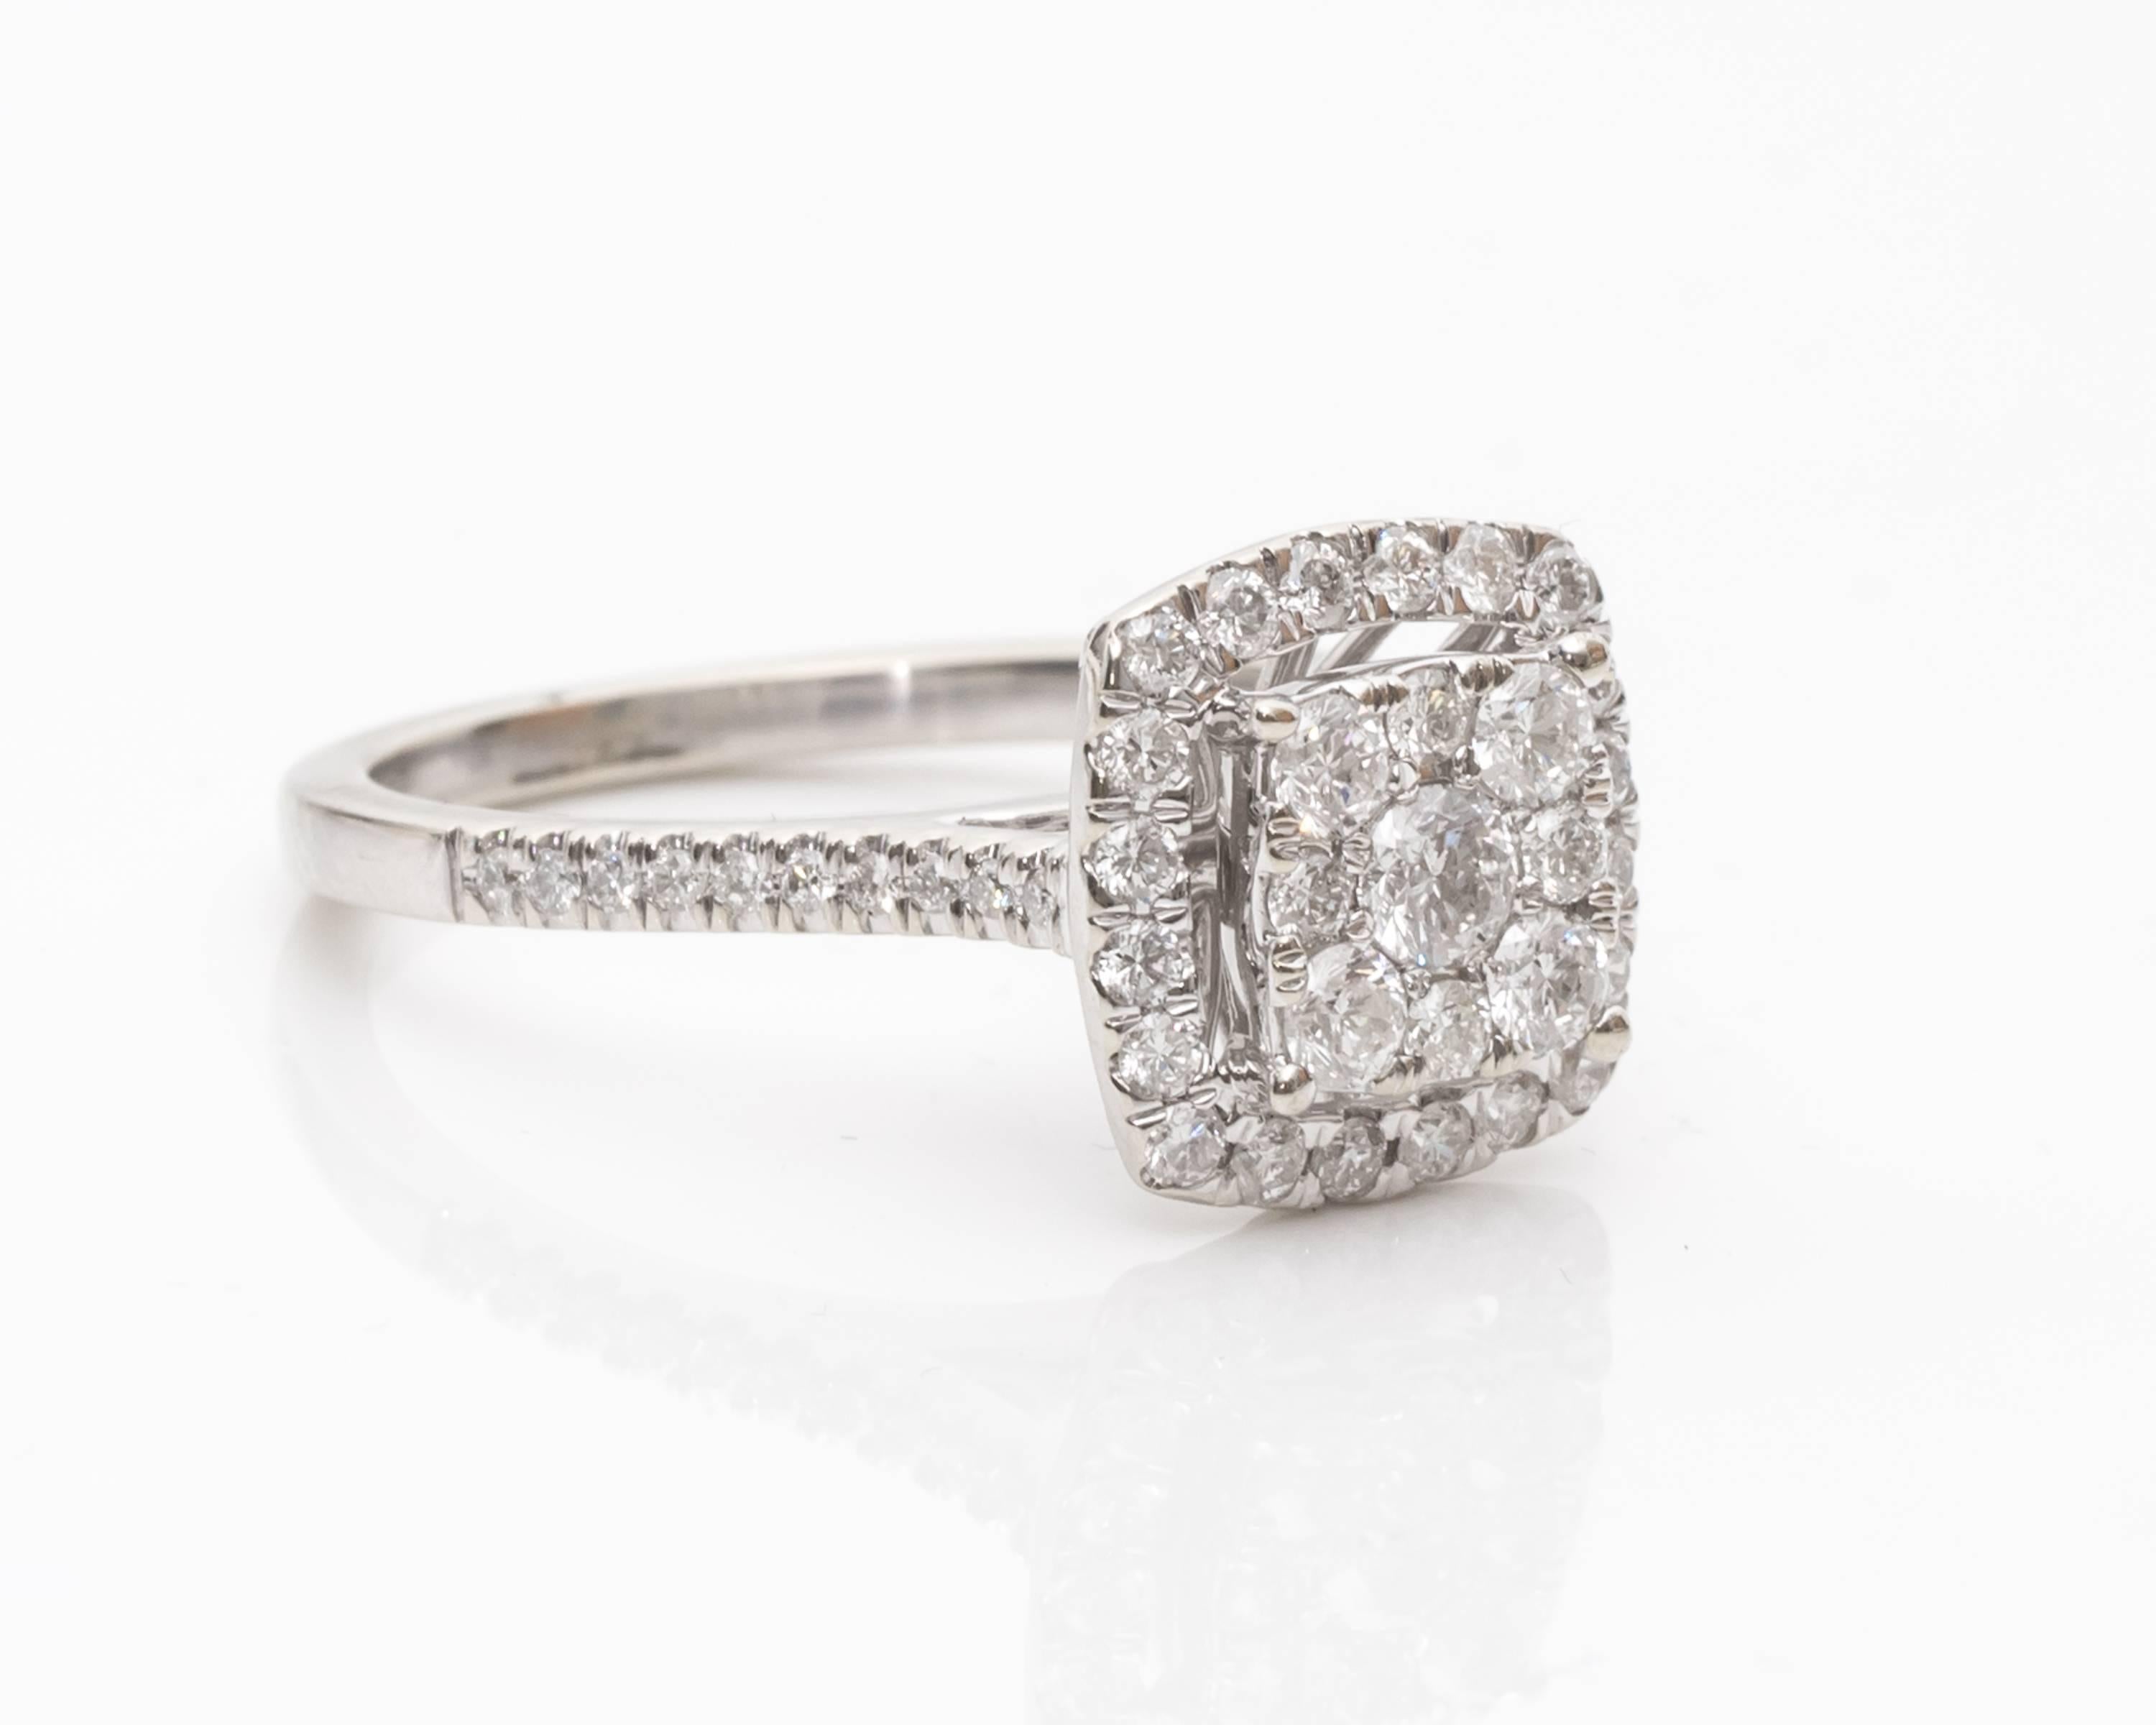 Item Description:
The center of this ring is made up of a cluster of diamonds. From a distance, these stones give the illusion of a large radiant cut stone! There is a halo of additional diamonds lower on the tier of this cathedral ring. Then there